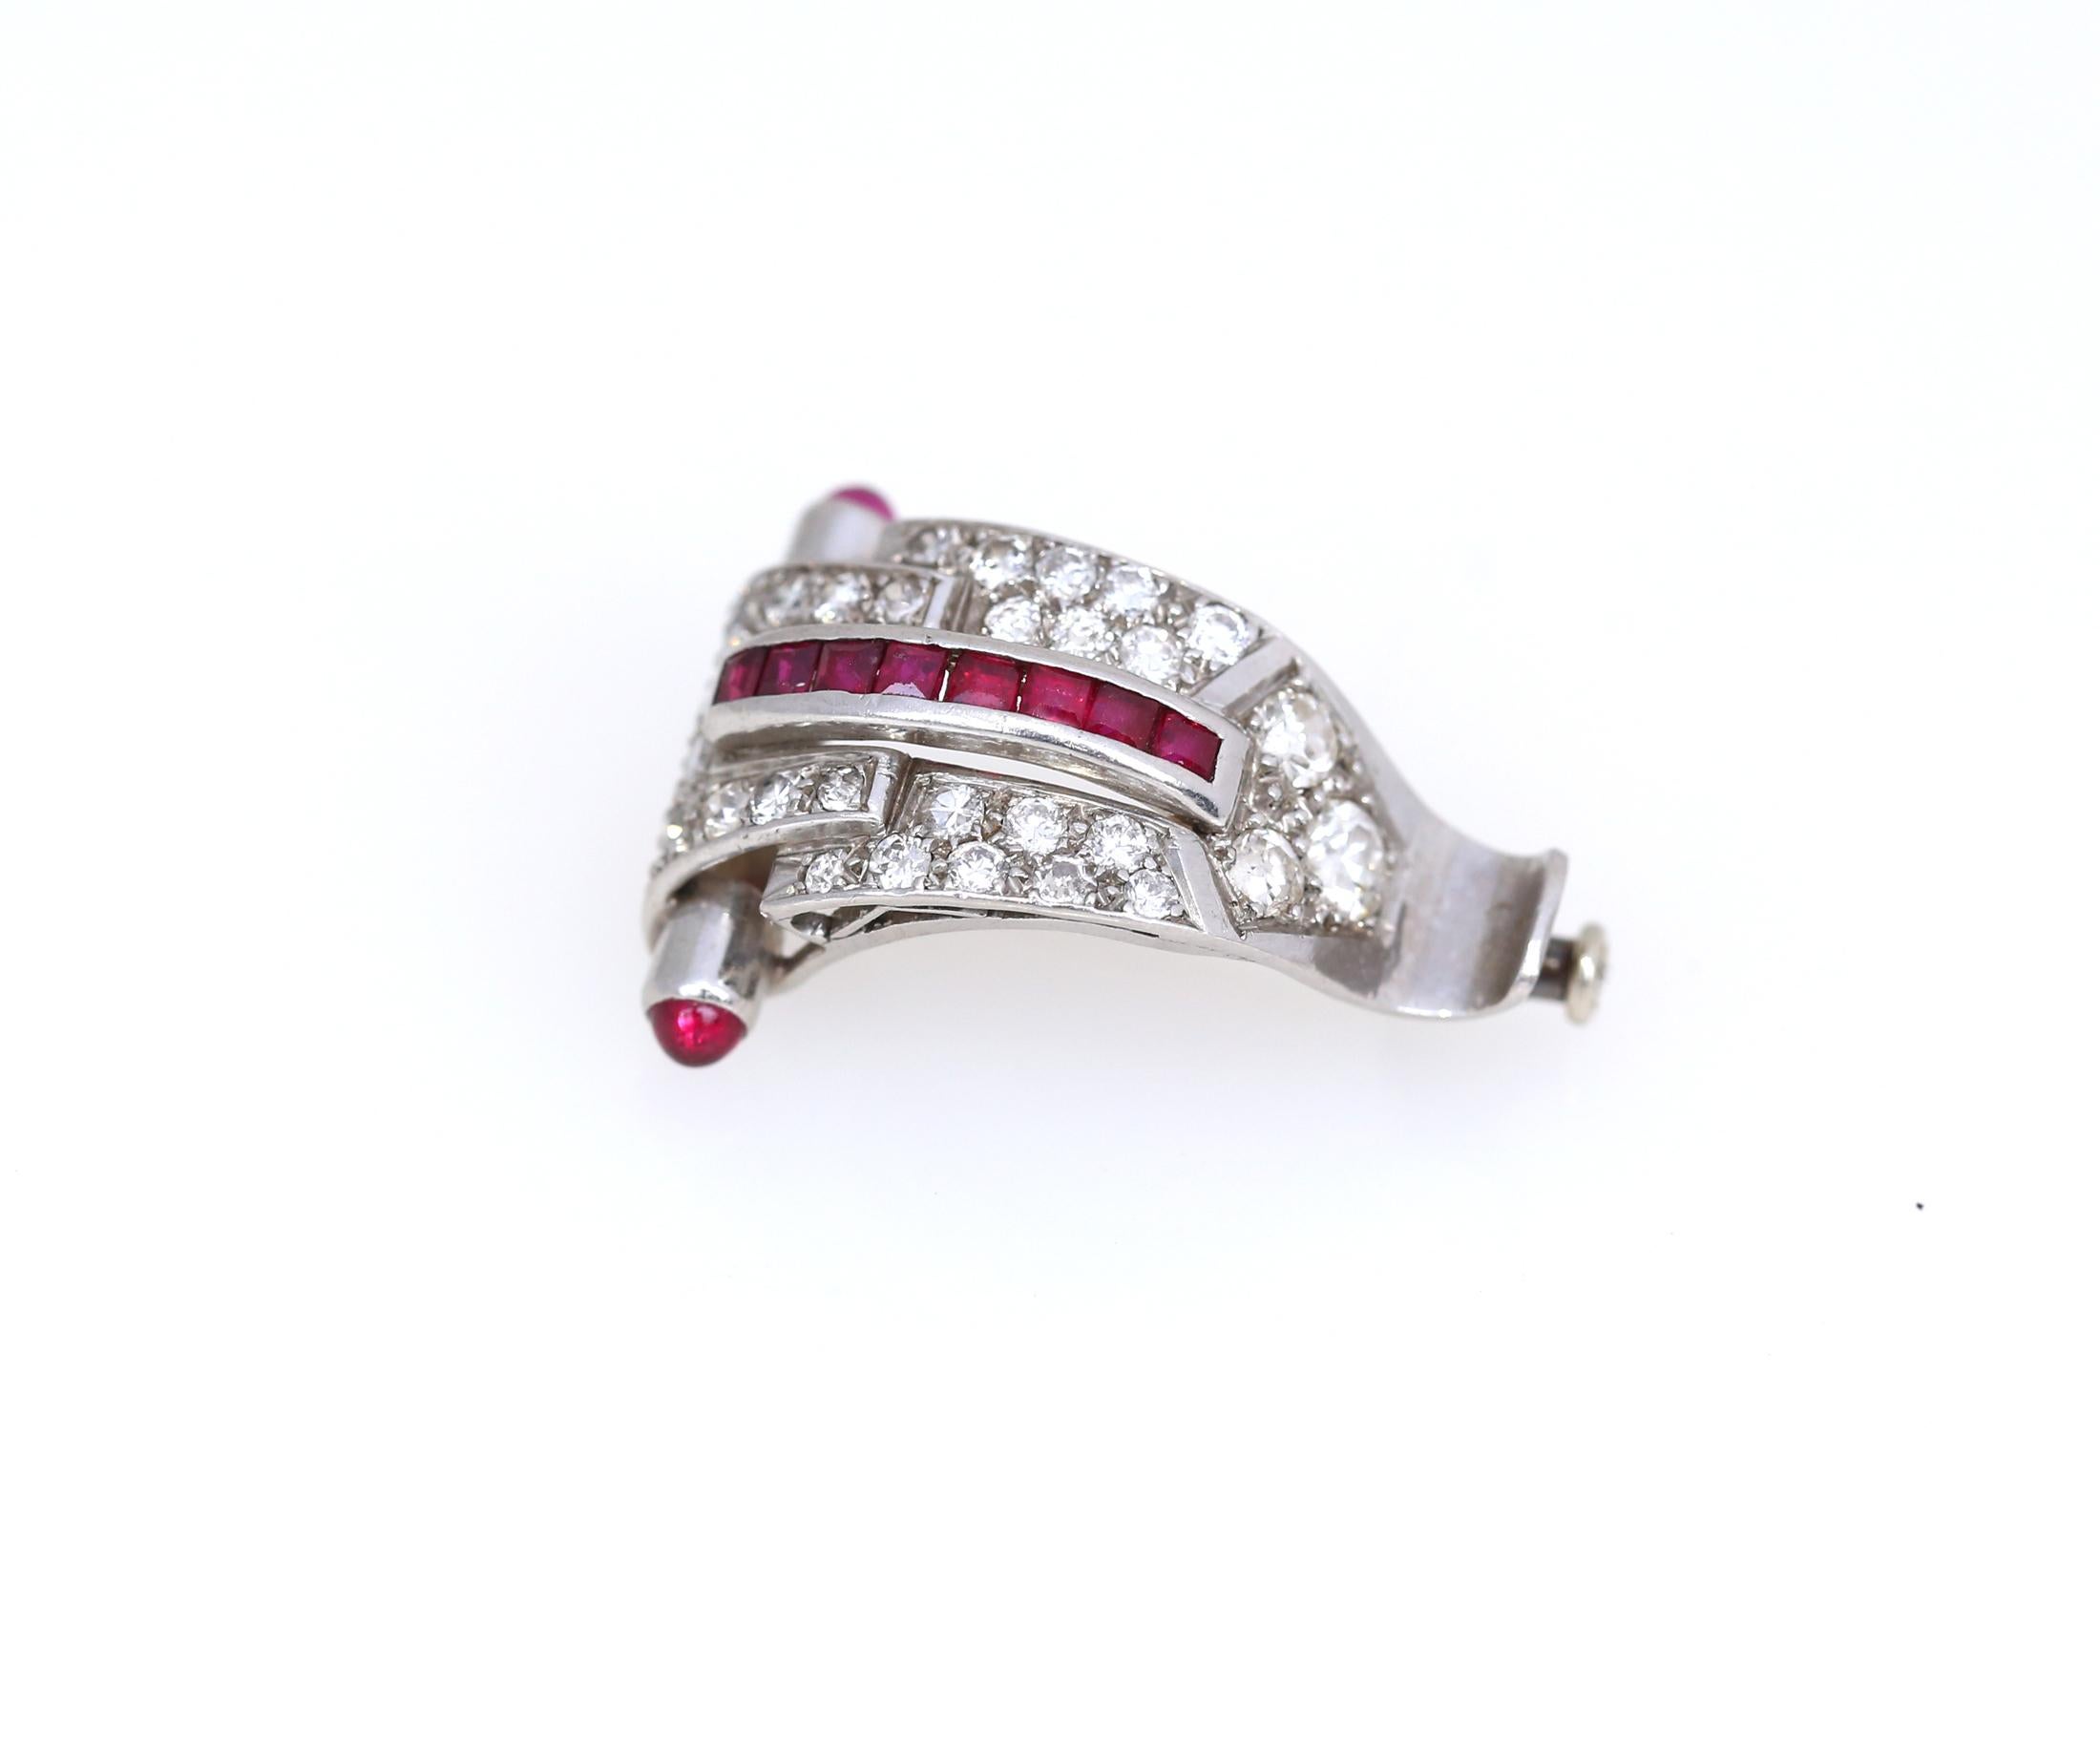 Art Deco Platinum Diamond 1.35 Carat Rubi Brooch, 1920

A superb example of the Art Deco style, in many ways. It's the red line on Rubies, it is in the wave shape of the brooch itself and in amazing red dot touch of the cabochon Rubes on the sides. 